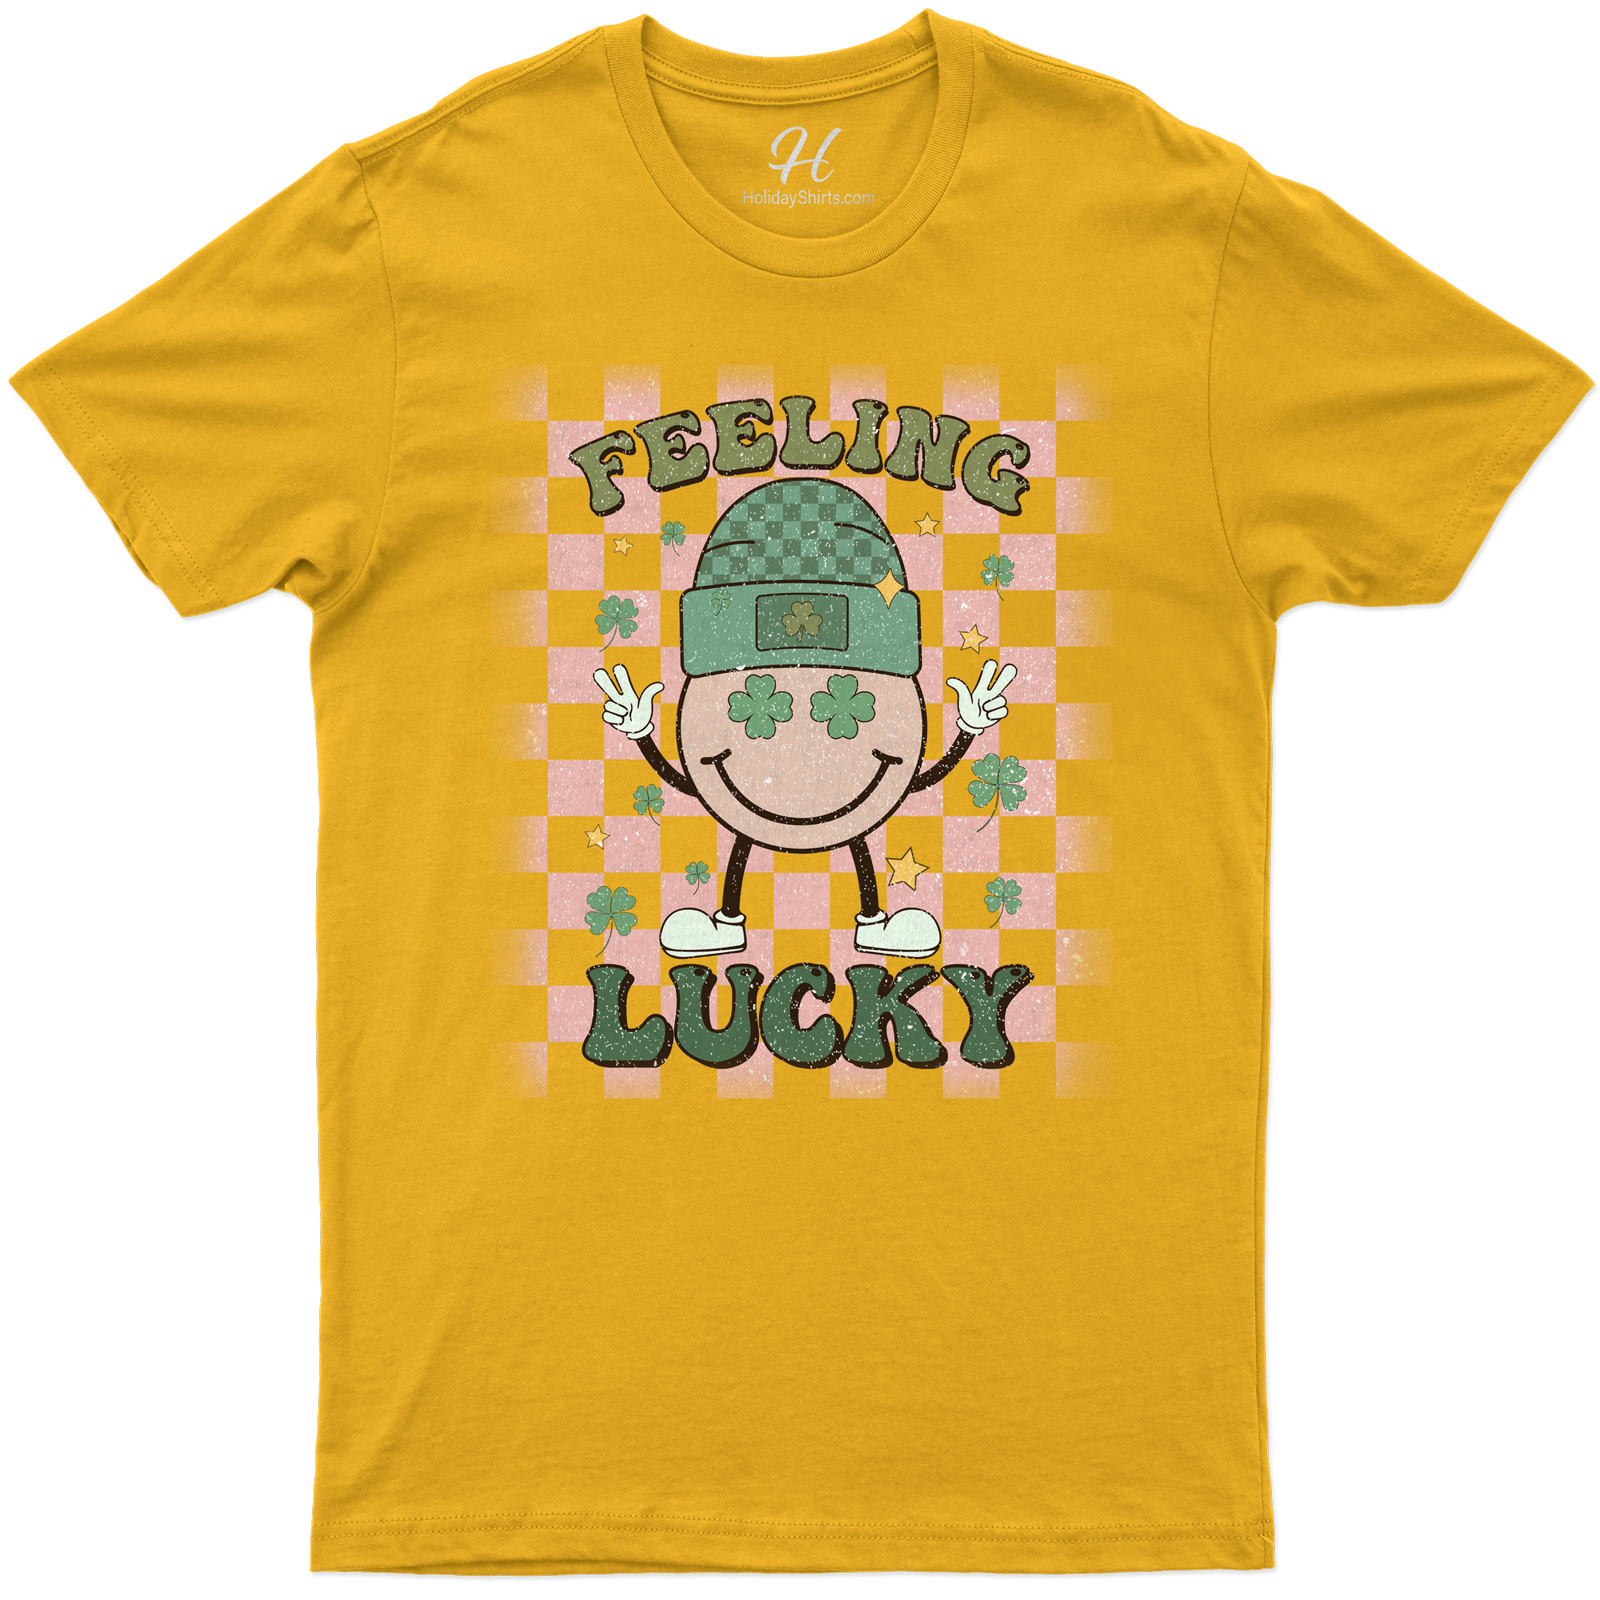 Feeling Lucky Festive Holiday Tee With Smiling Character And Shamrock Accents